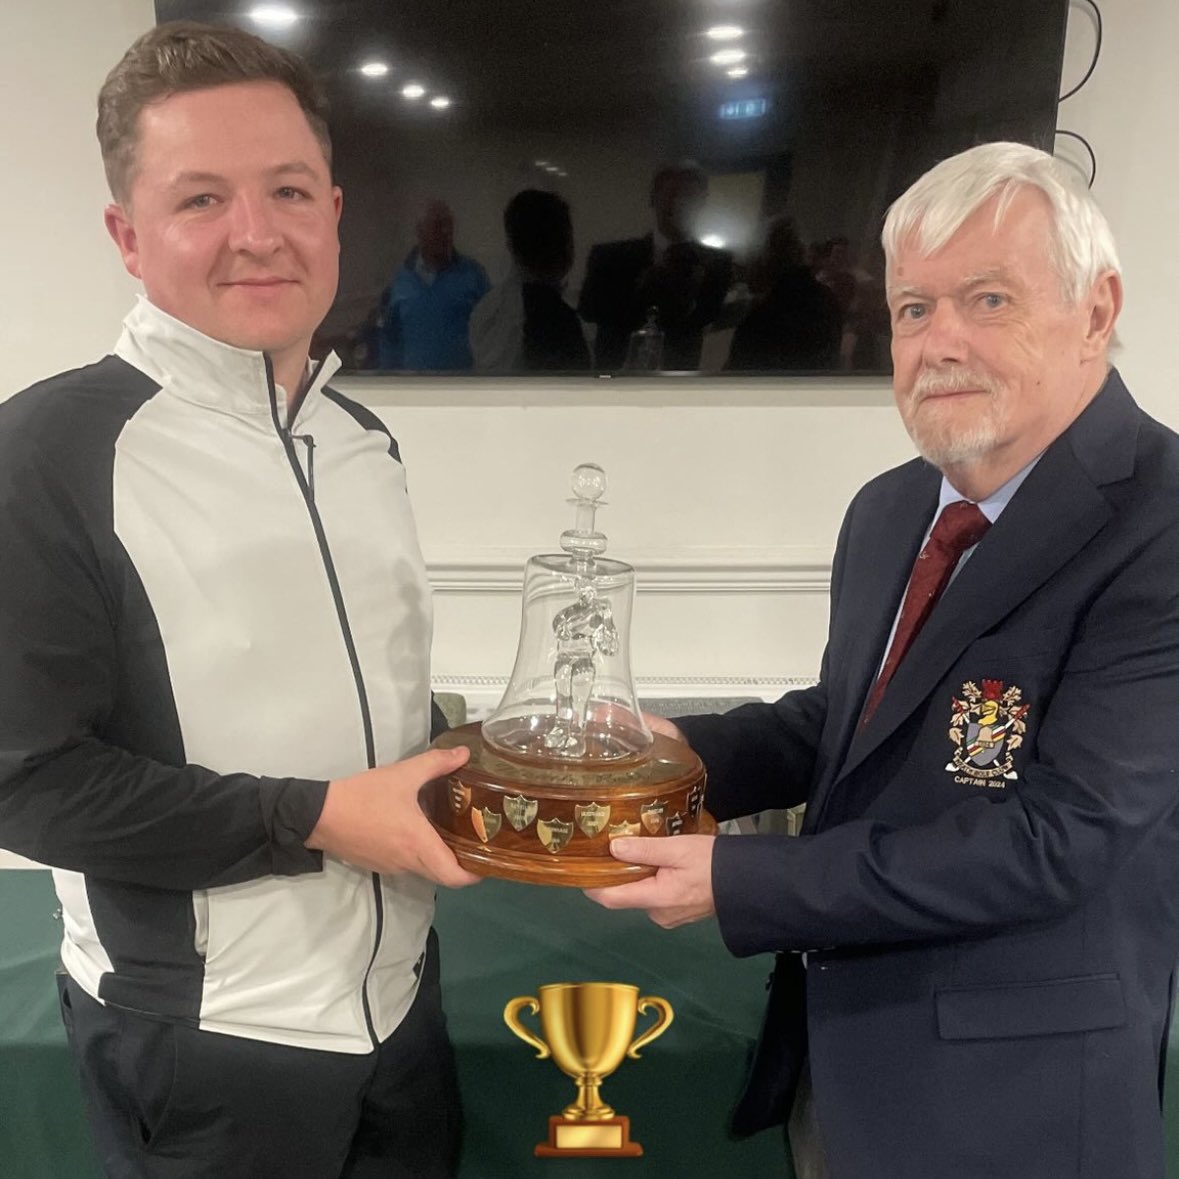 Congratulations to @radyrgolf member @twrighttt who won the Neath Bell today following a playoff against Piers Murphy! #neathbell